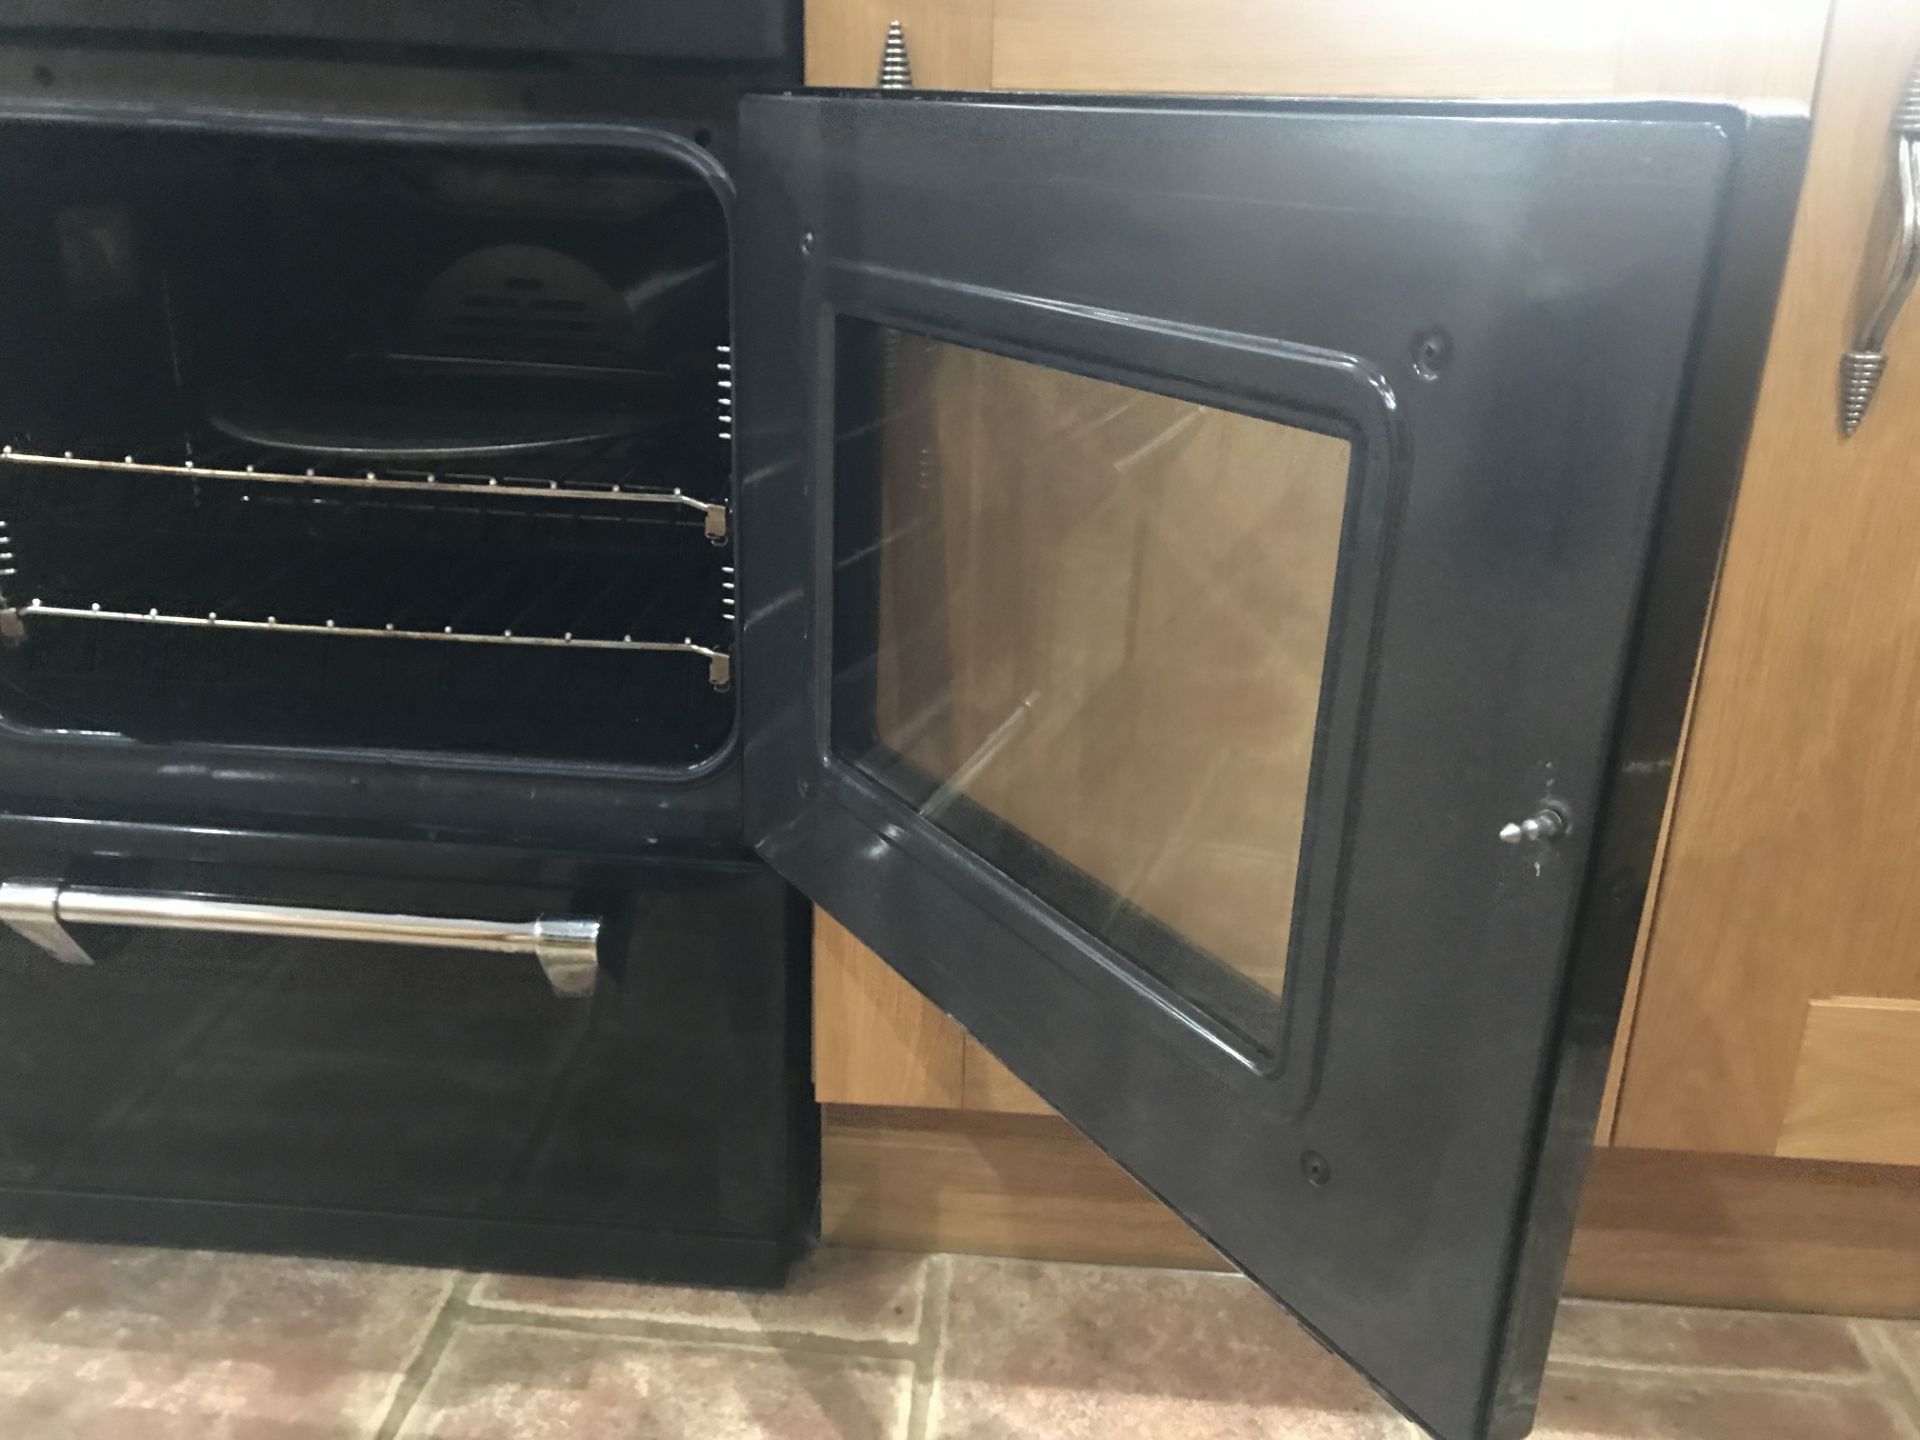 1 x Stoves Richmond 1100DF Dual Fuel Range Cooker With Matching Extractor Hood - Black Finish With 4 - Image 14 of 18